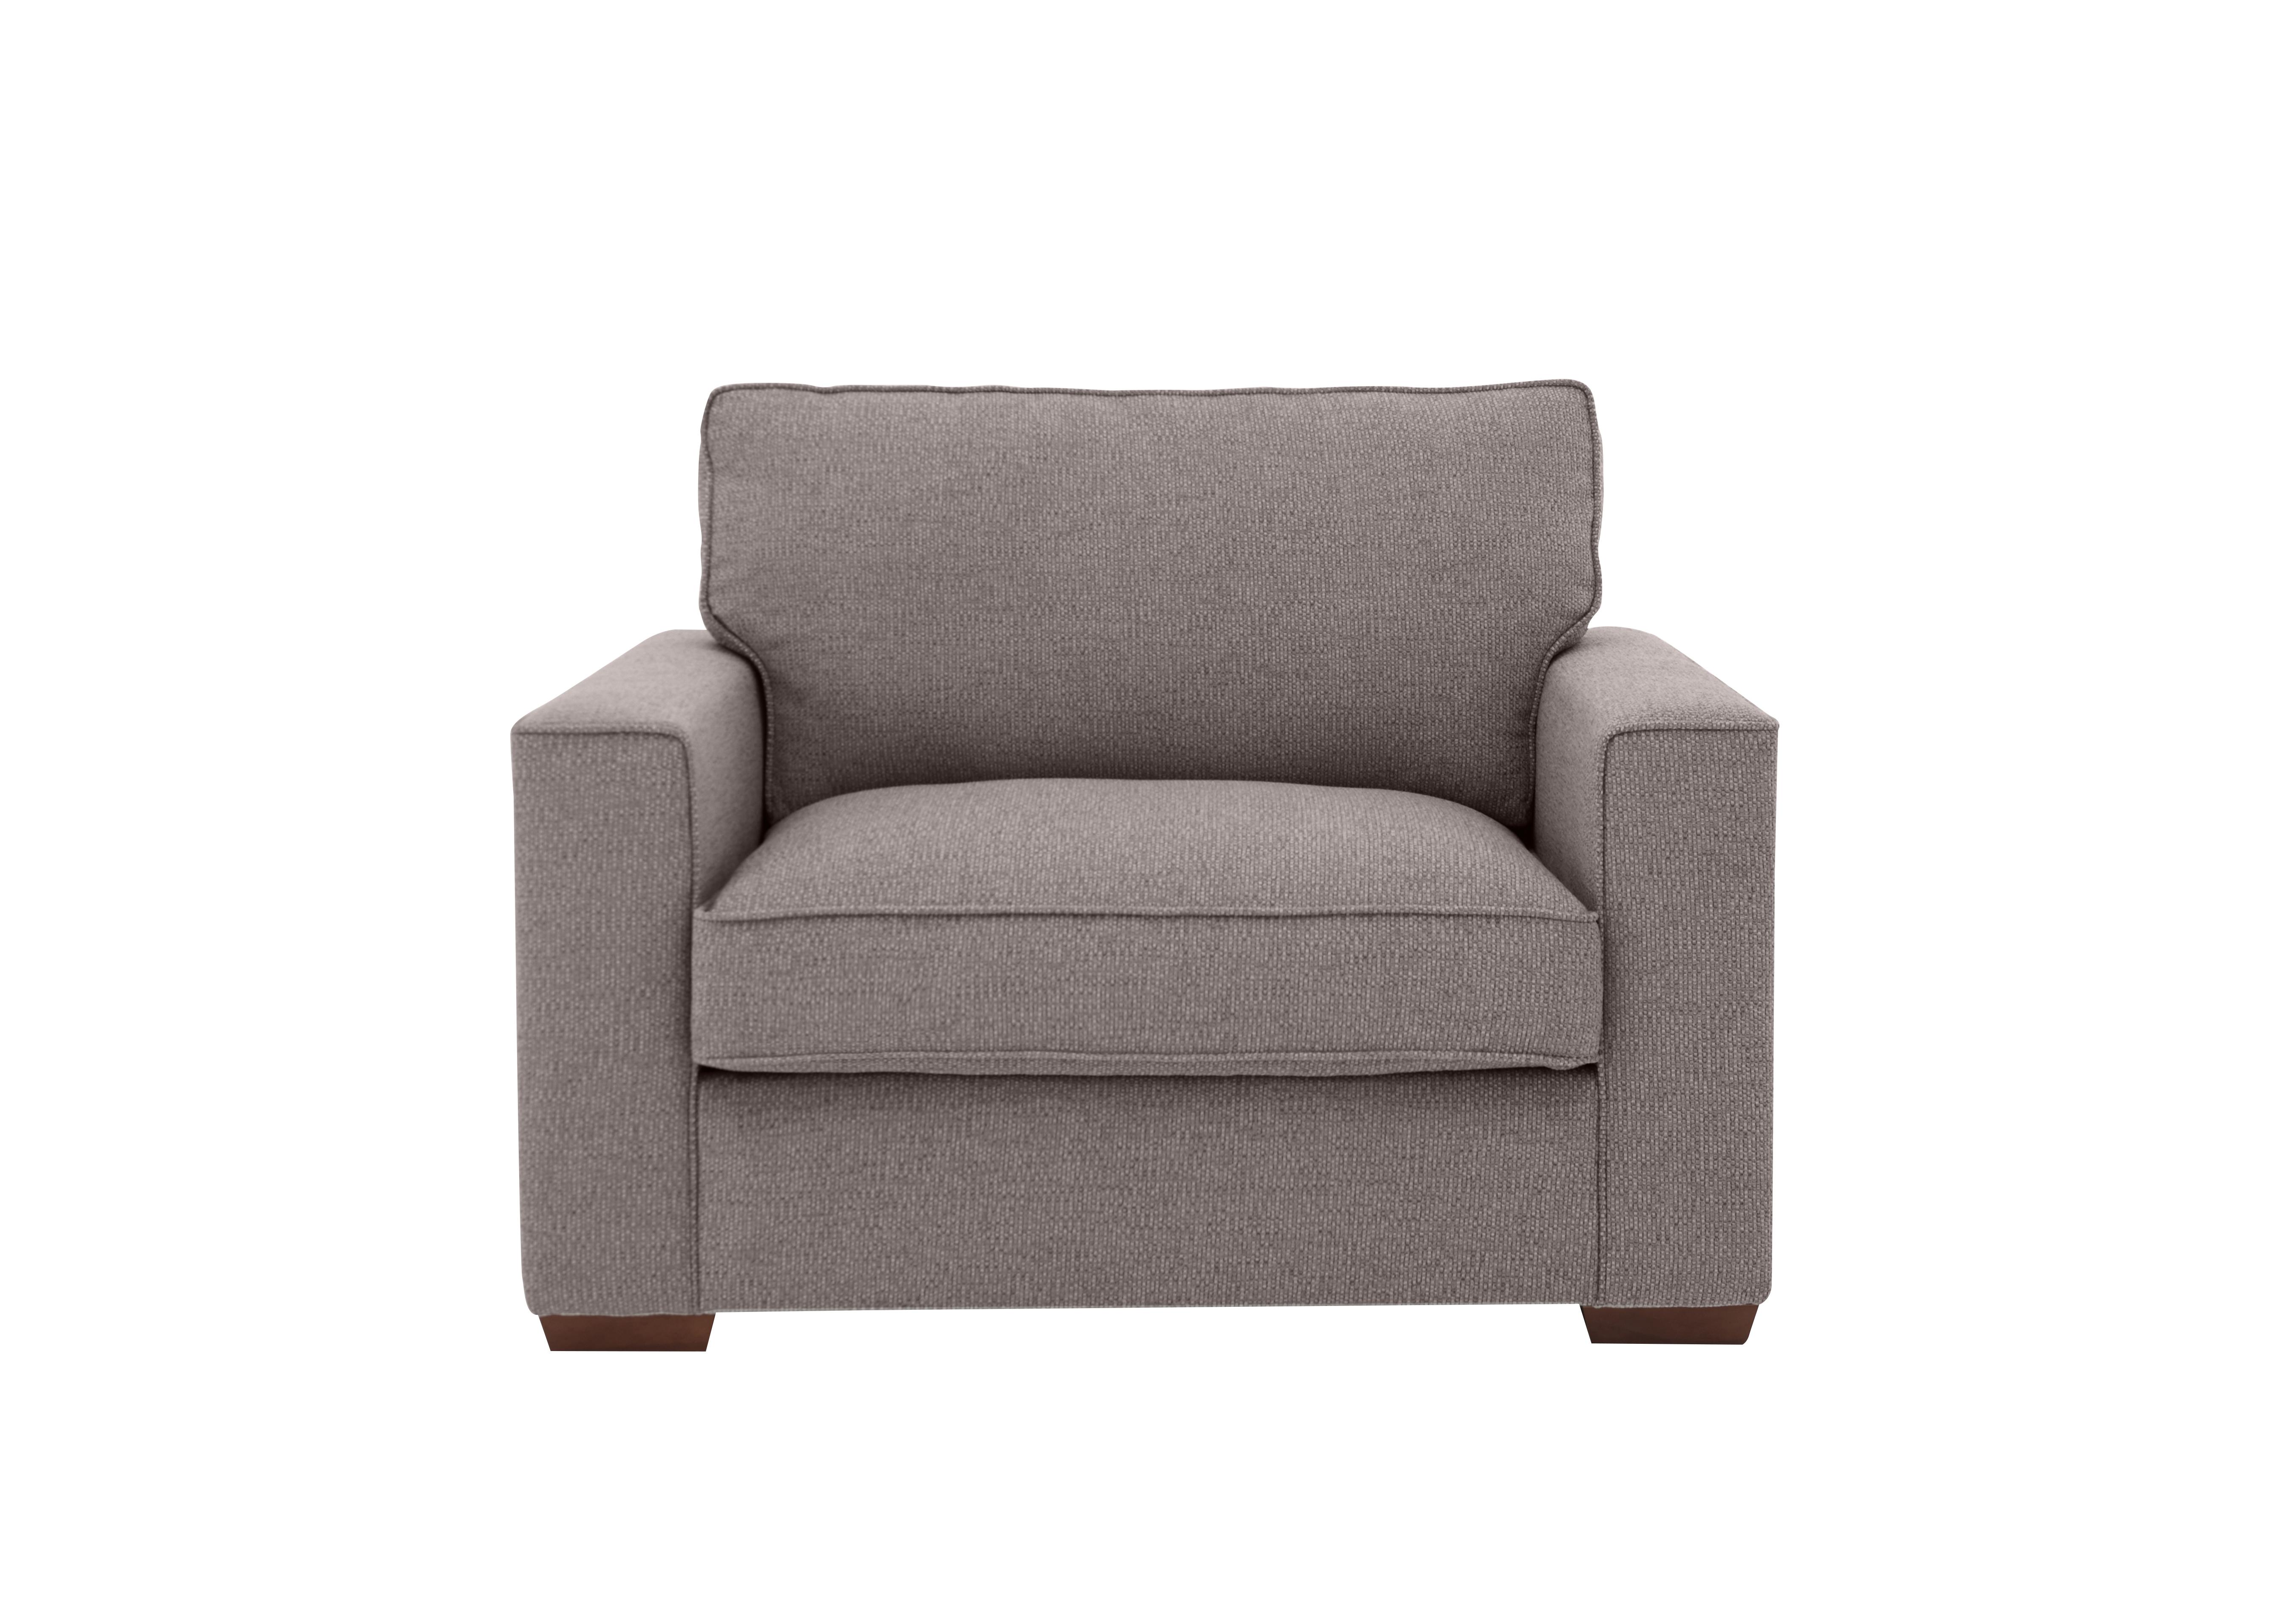 Cory Fabric Classic Back Chair Bed in Dallas Taupe on Furniture Village